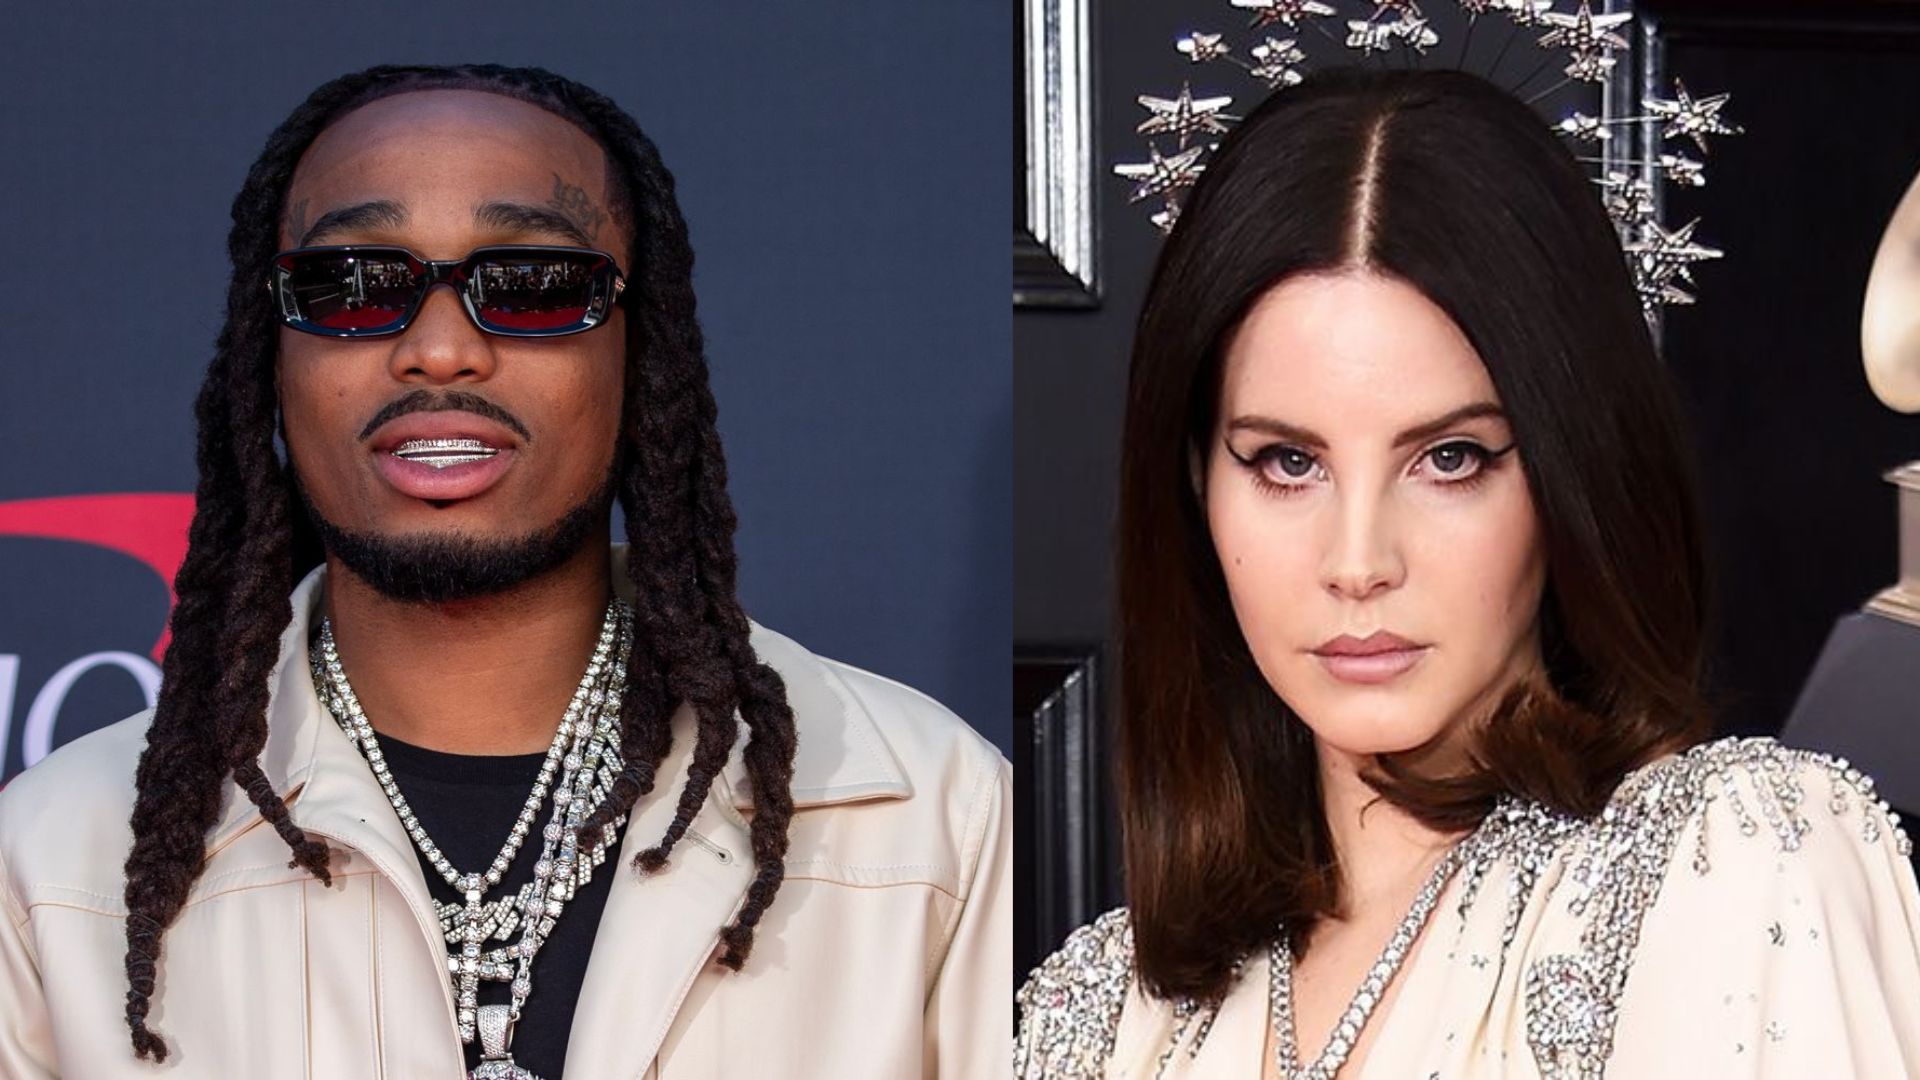 Are Quavo And Lana Del Rey Dating?